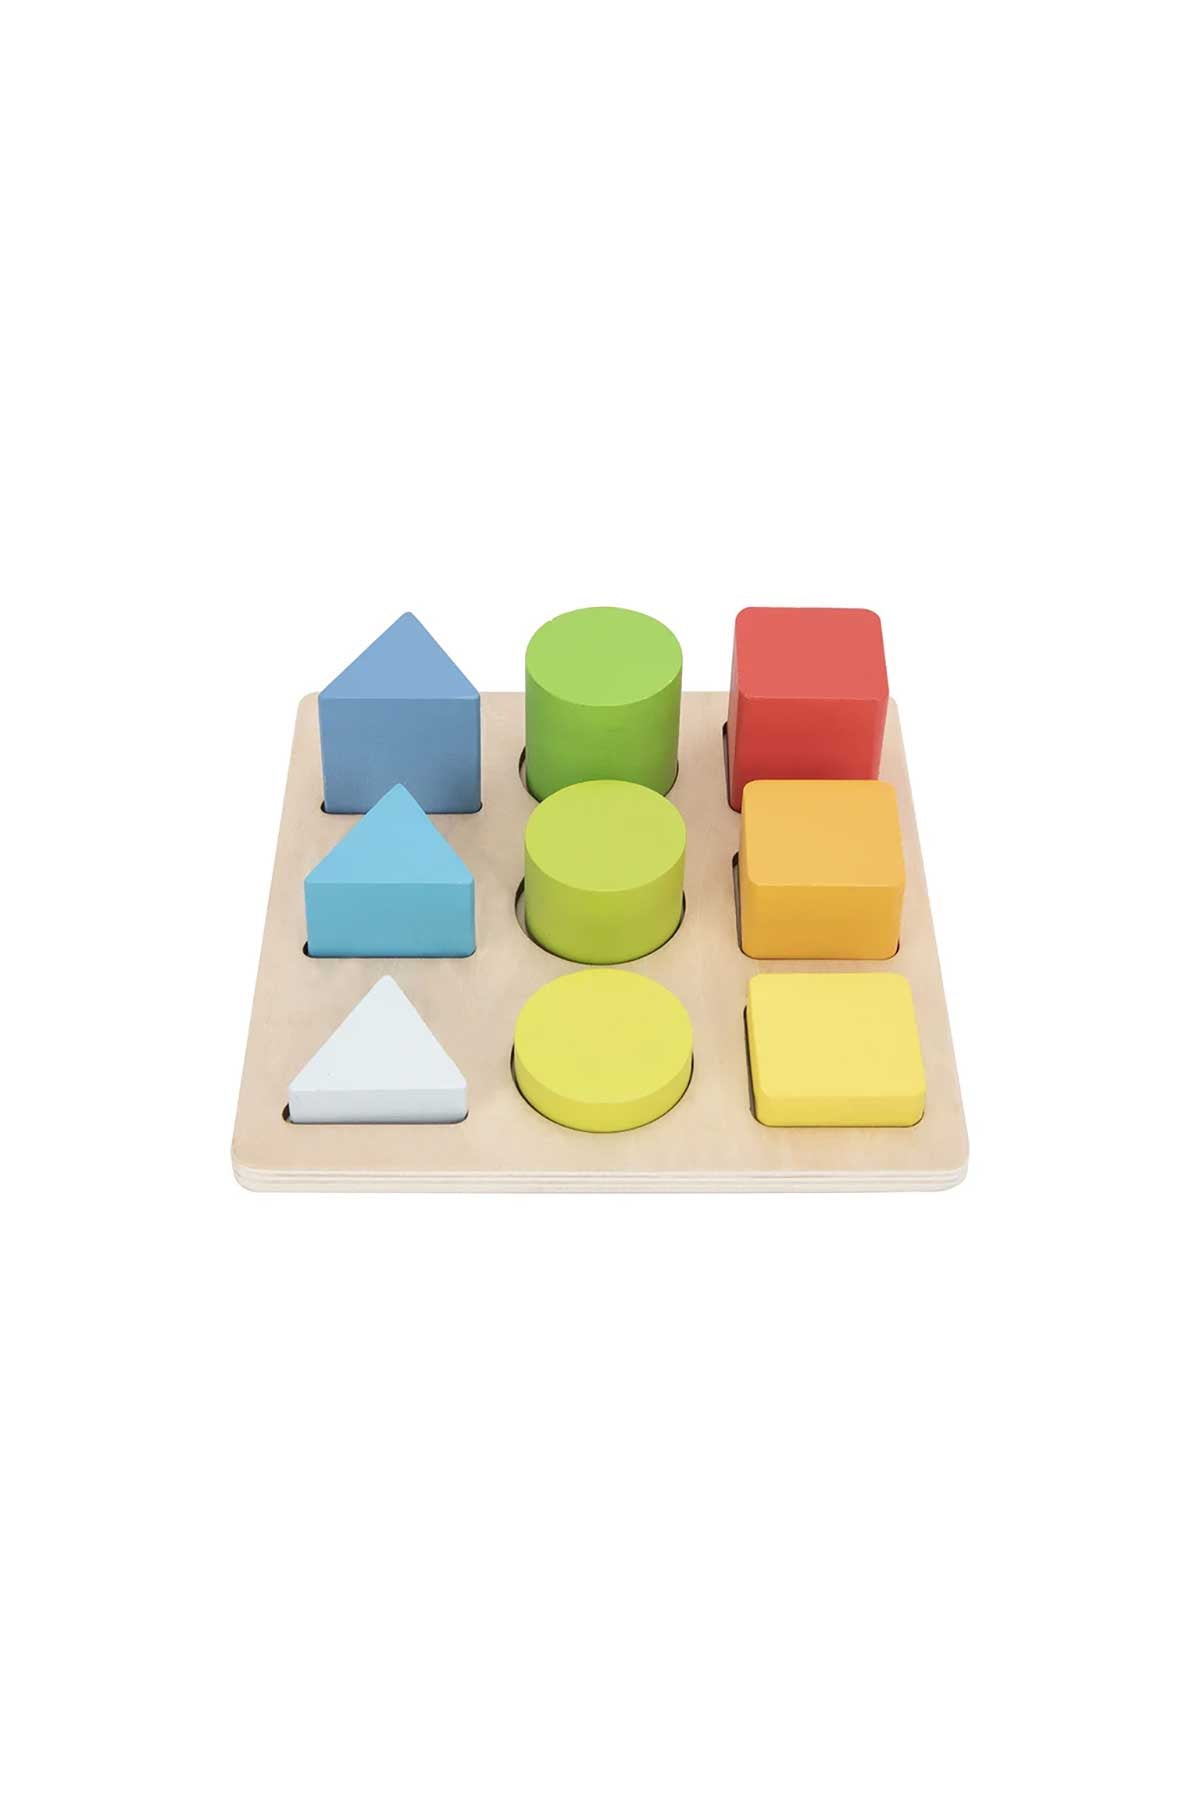 Colour and Shape Sorter 